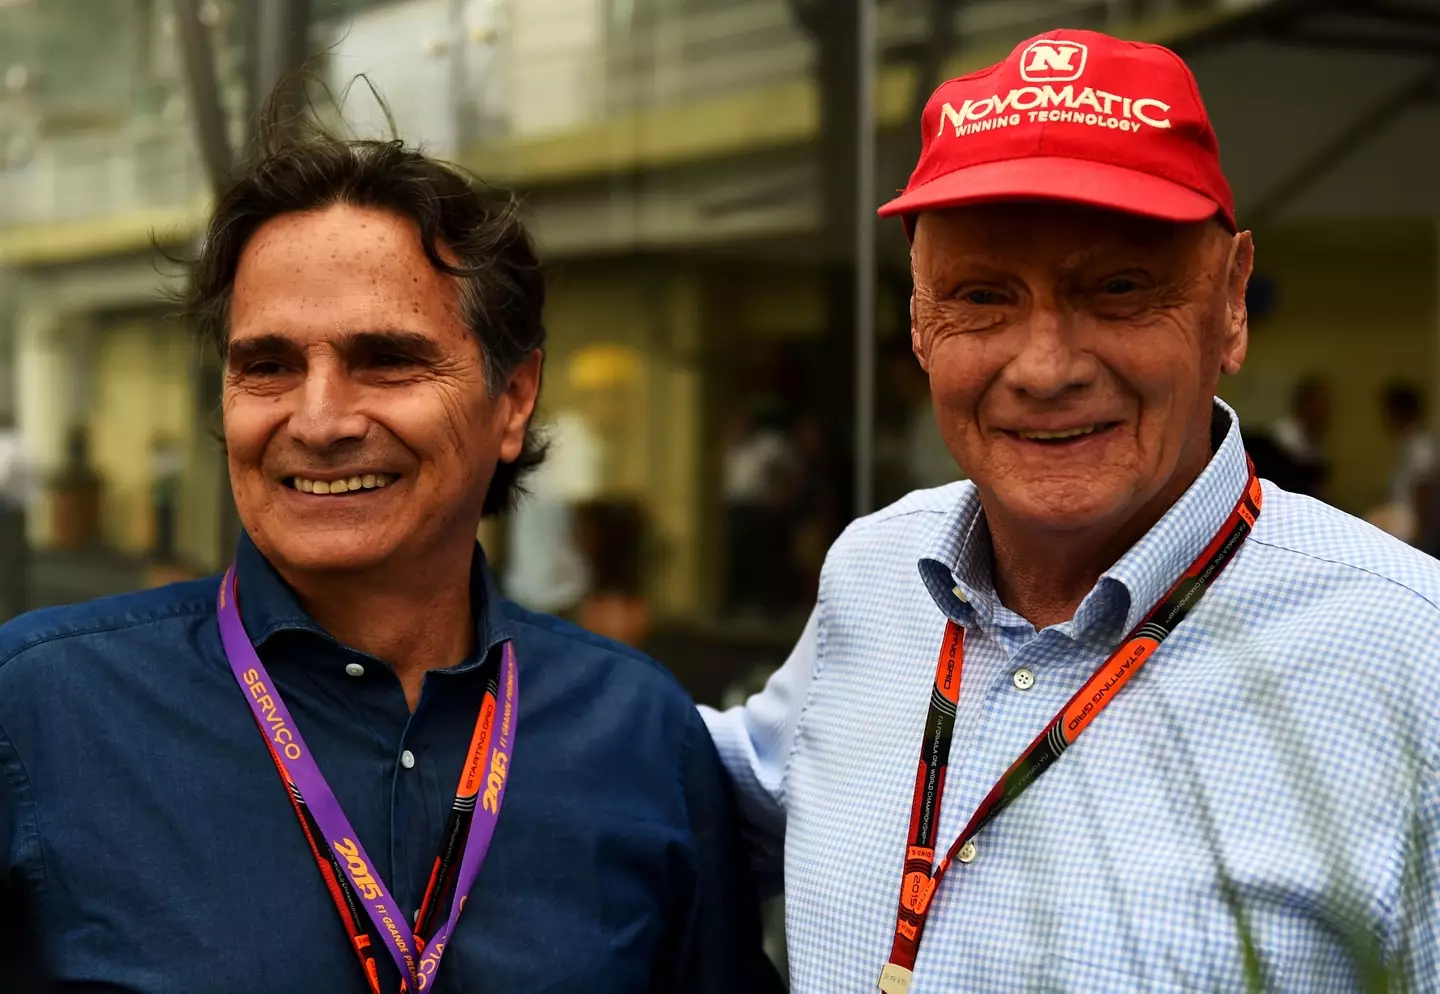 Nelson Piquet made the remarks on a podcast interview in 2021.